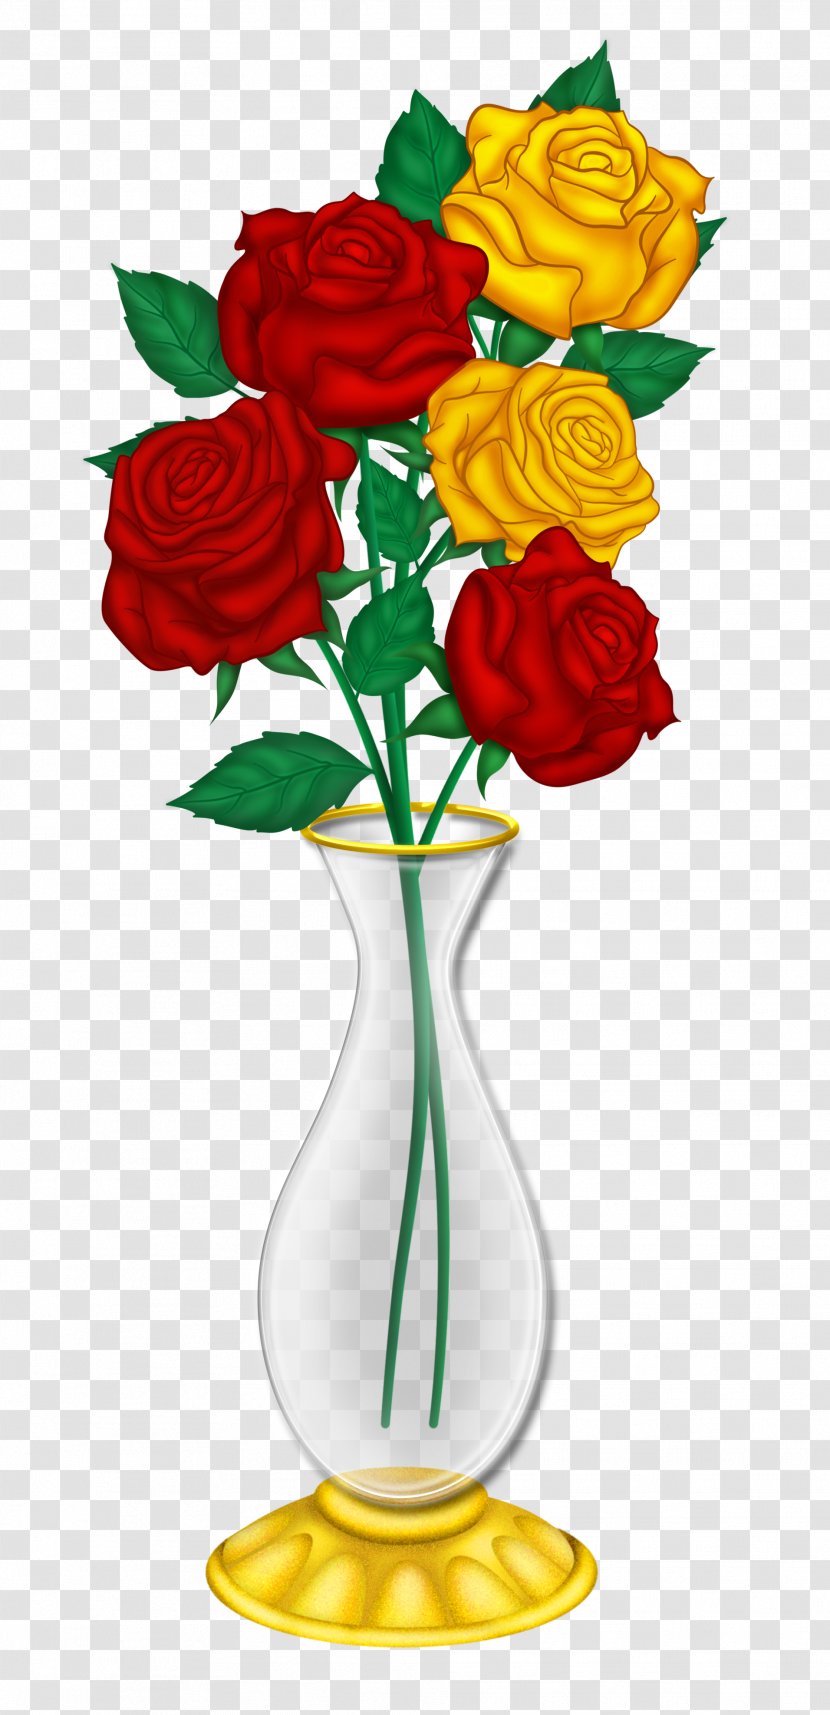 Vase Flower Rose Clip Art - Order - Beautiful With Red And Yellow Roses Picture Transparent PNG